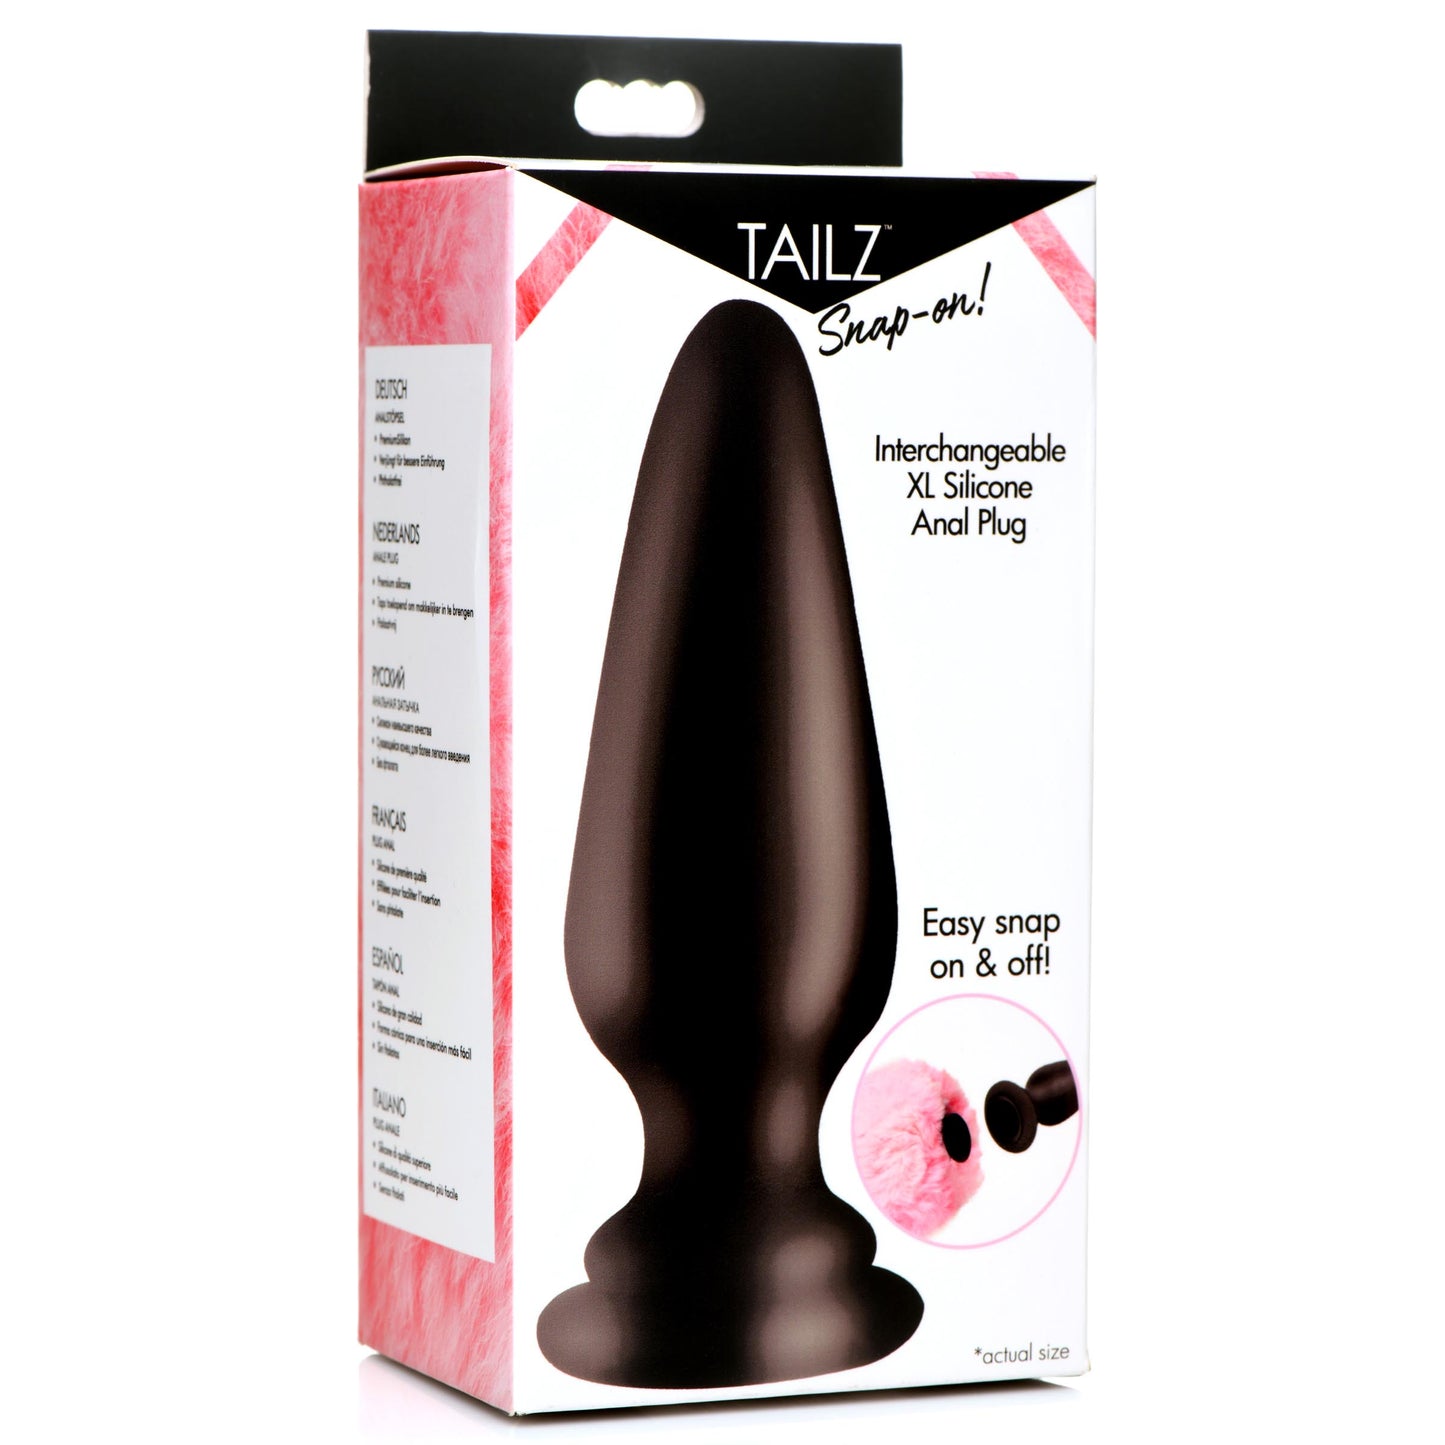 Interchangeable Silicone Anal Plug - Xl